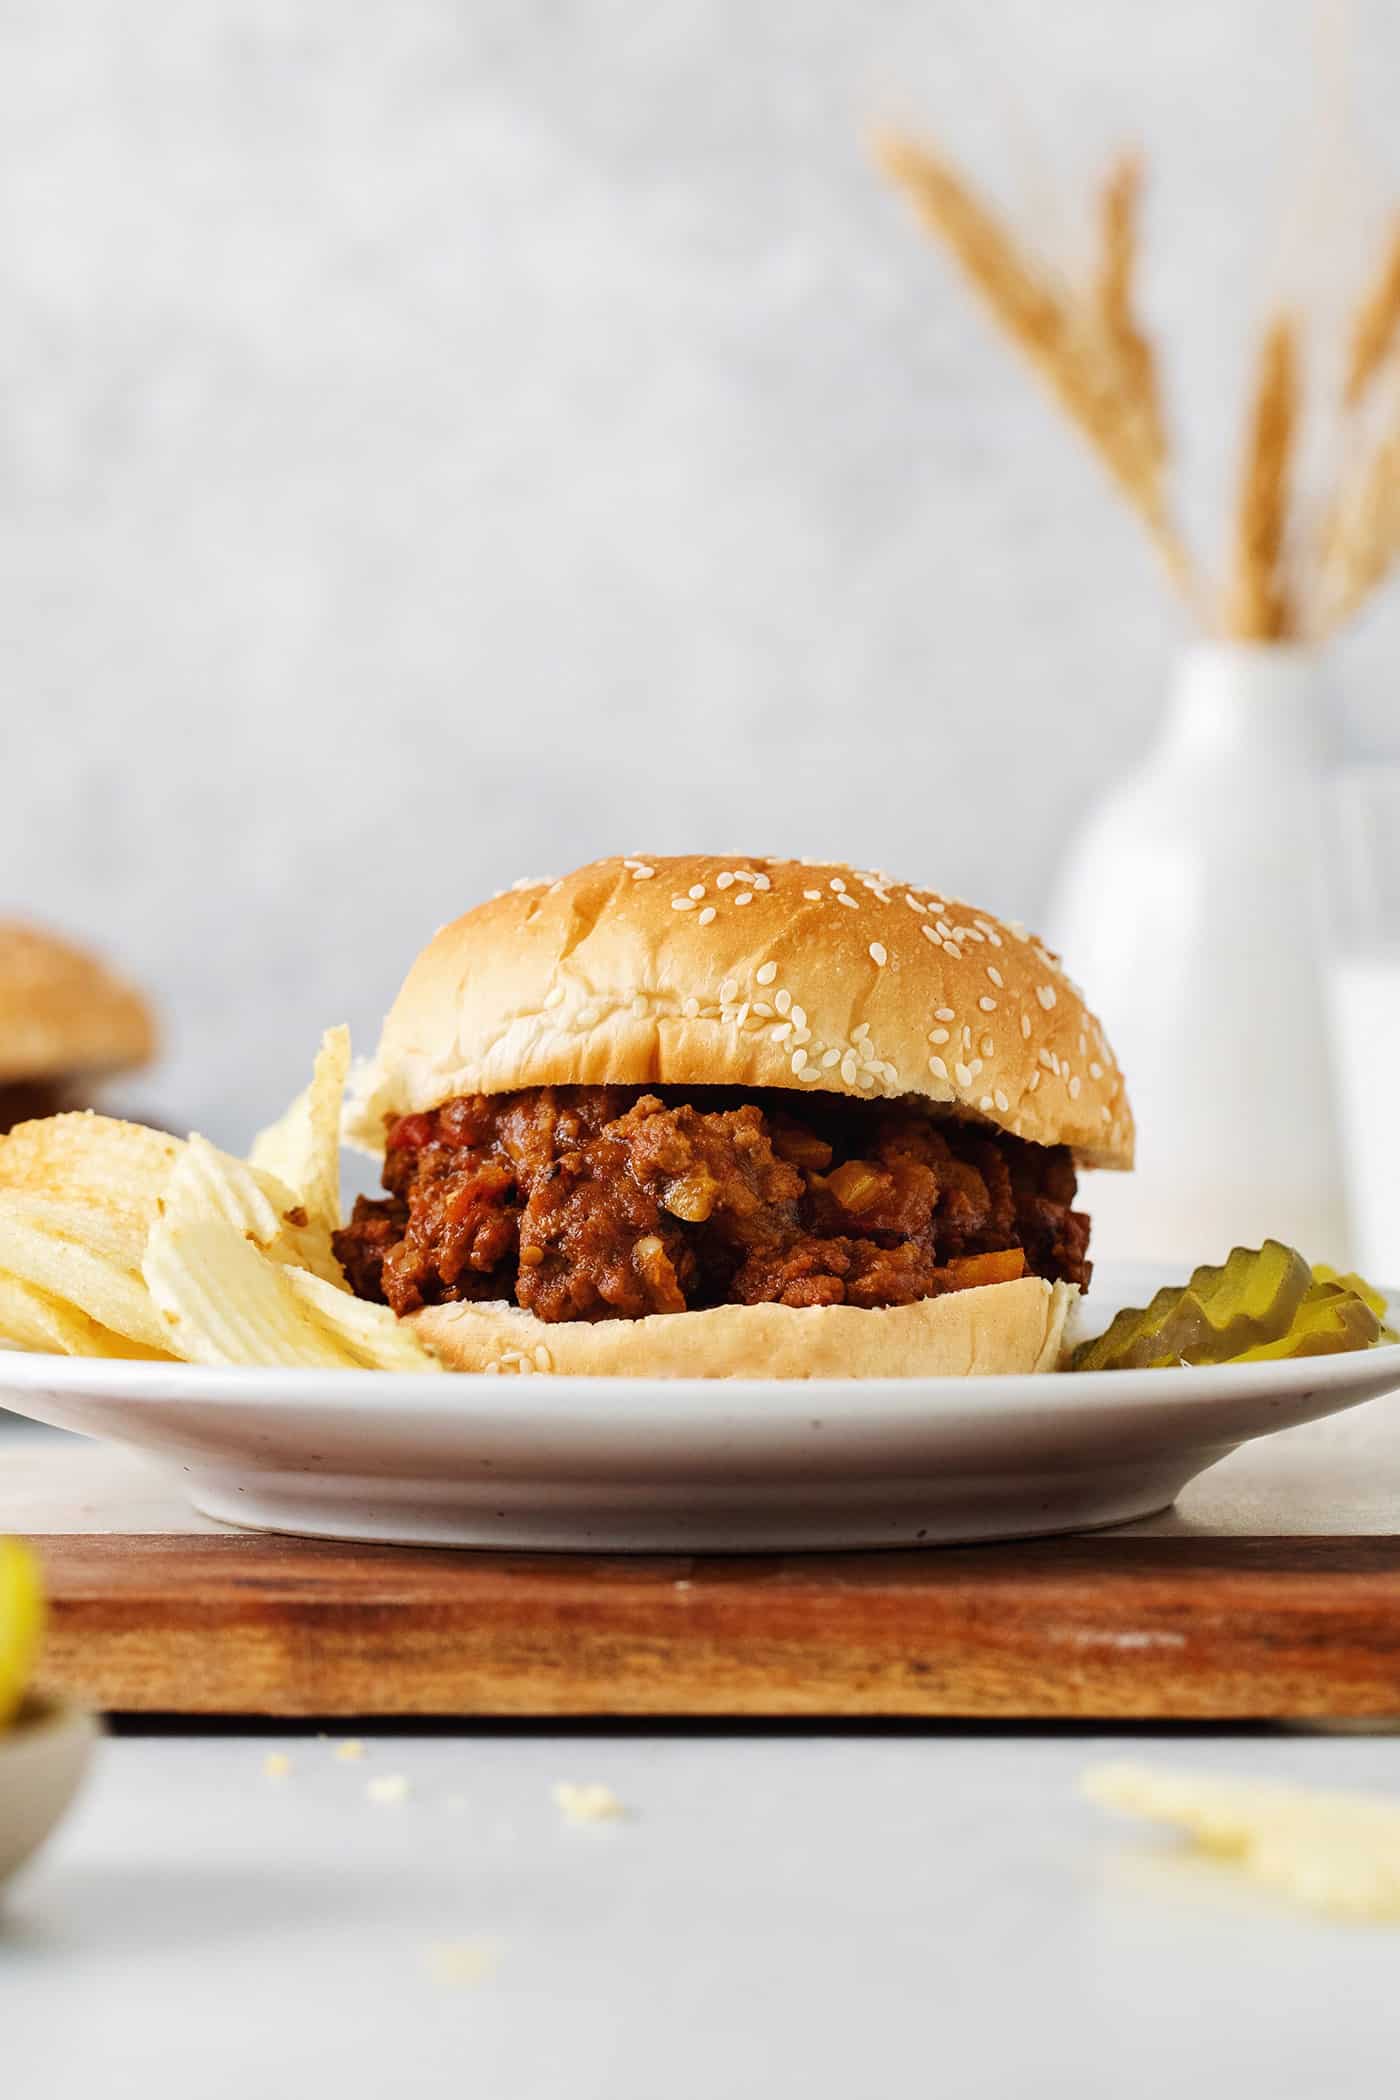 A sloppy joe sandwich on a plate with chips and pickles